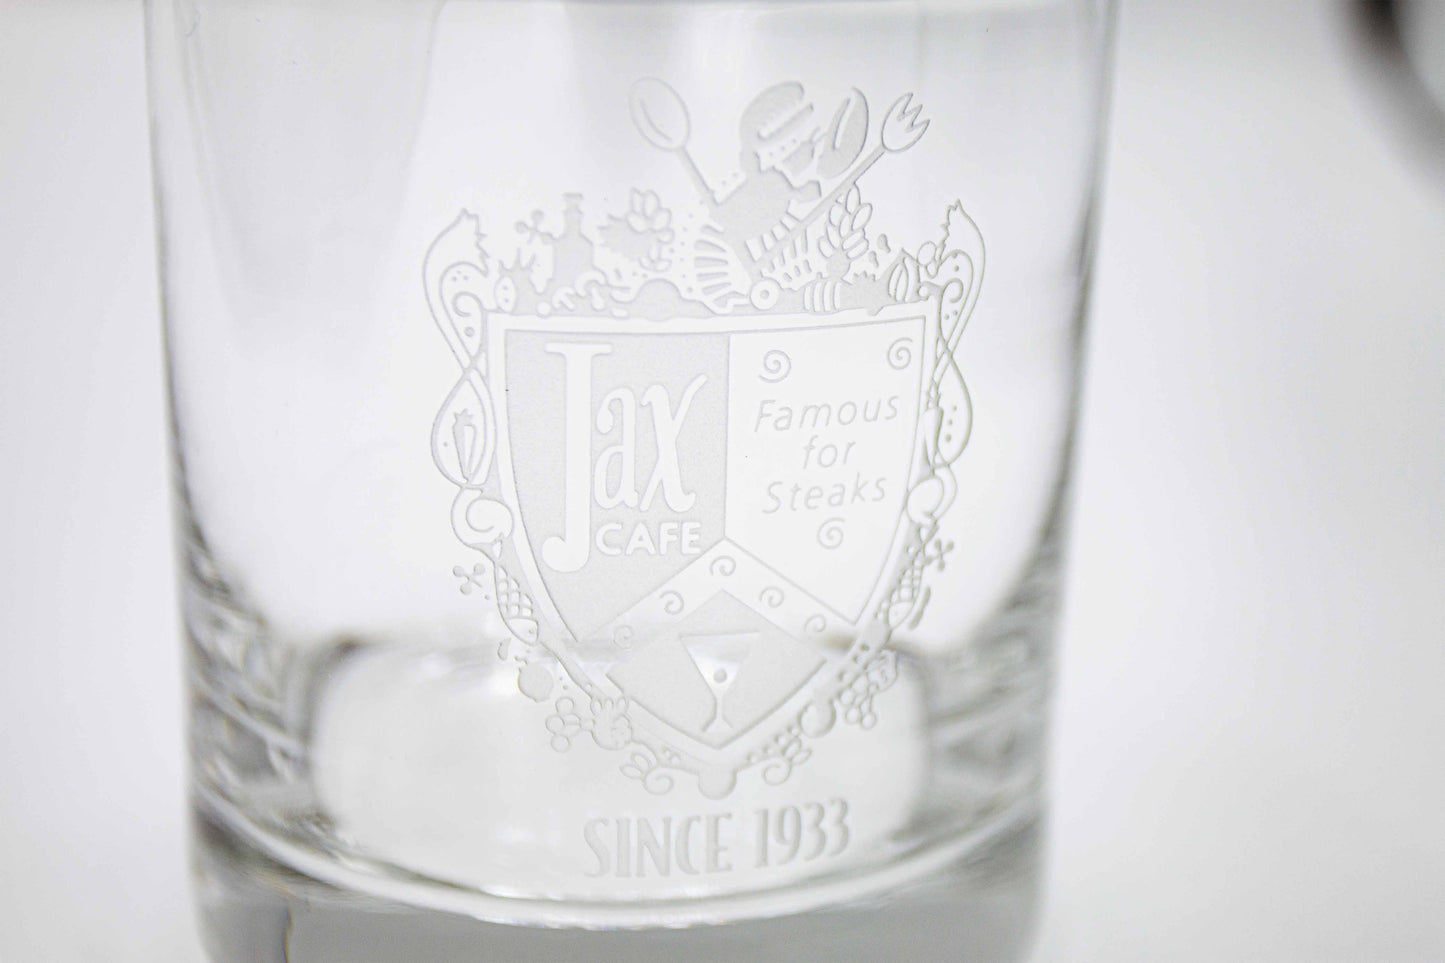 Close up of the cocktail glass with the text "Jax Cafe Famous for steaks since 1933"